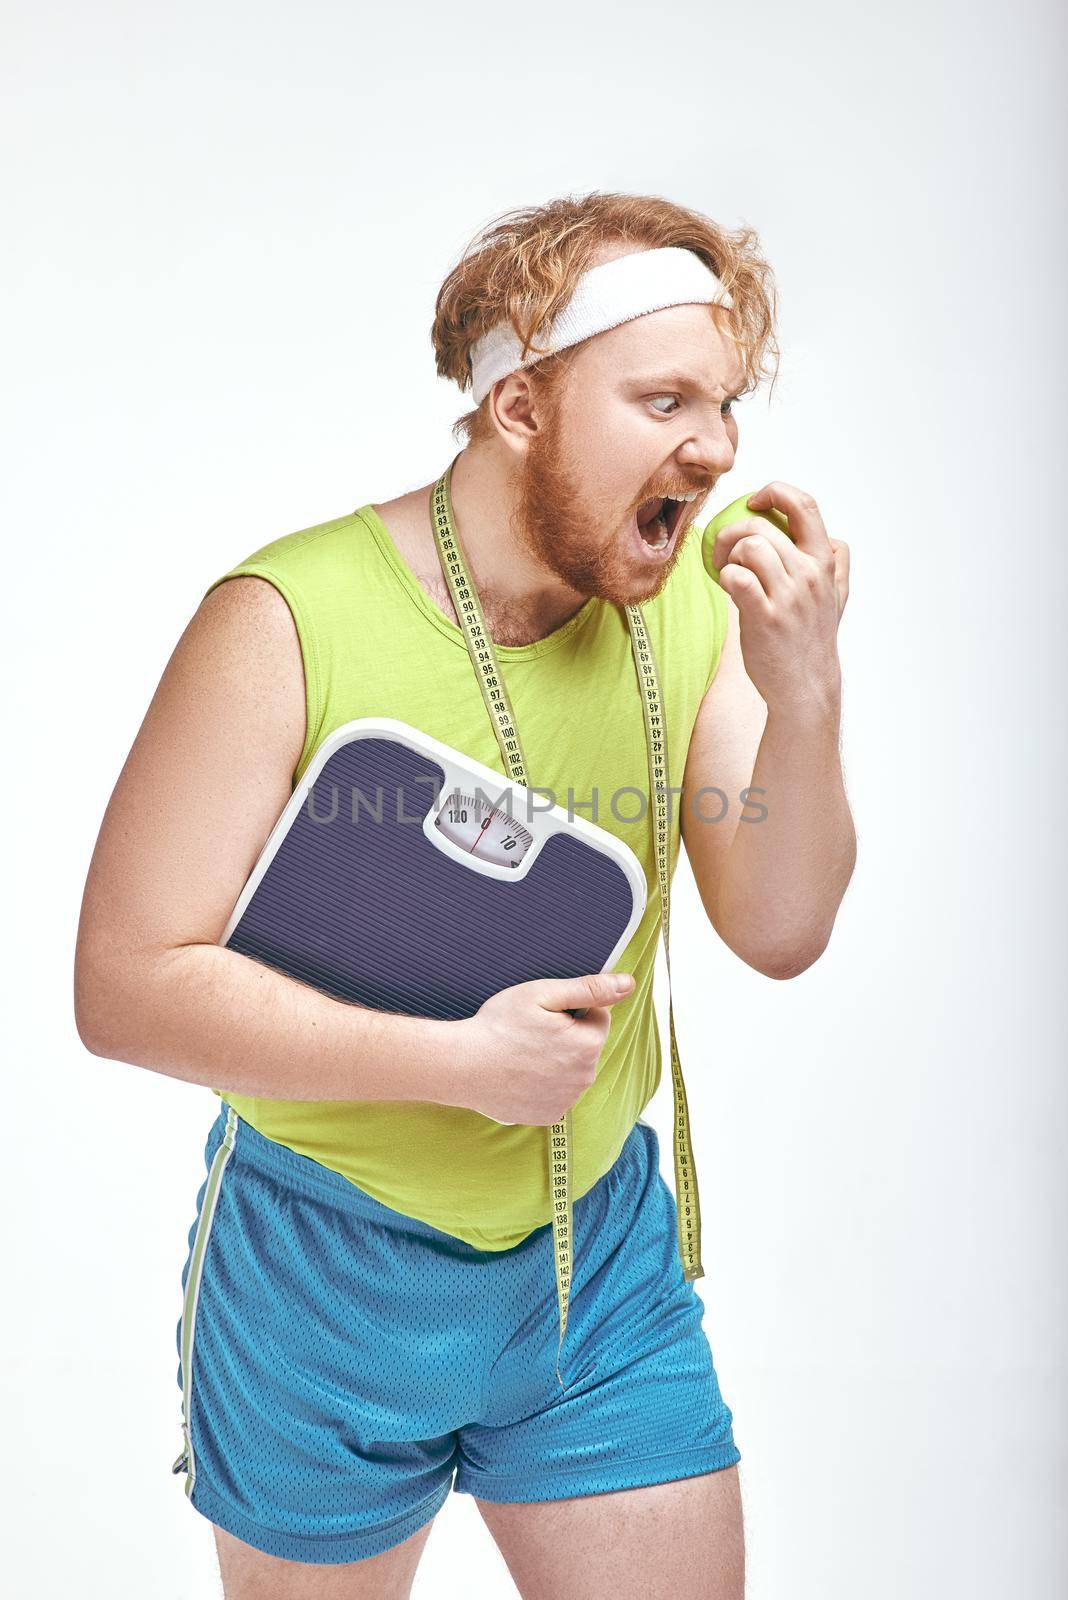 Funny picture of red haired, bearded, plump man on white background. Man holding an apple and scales